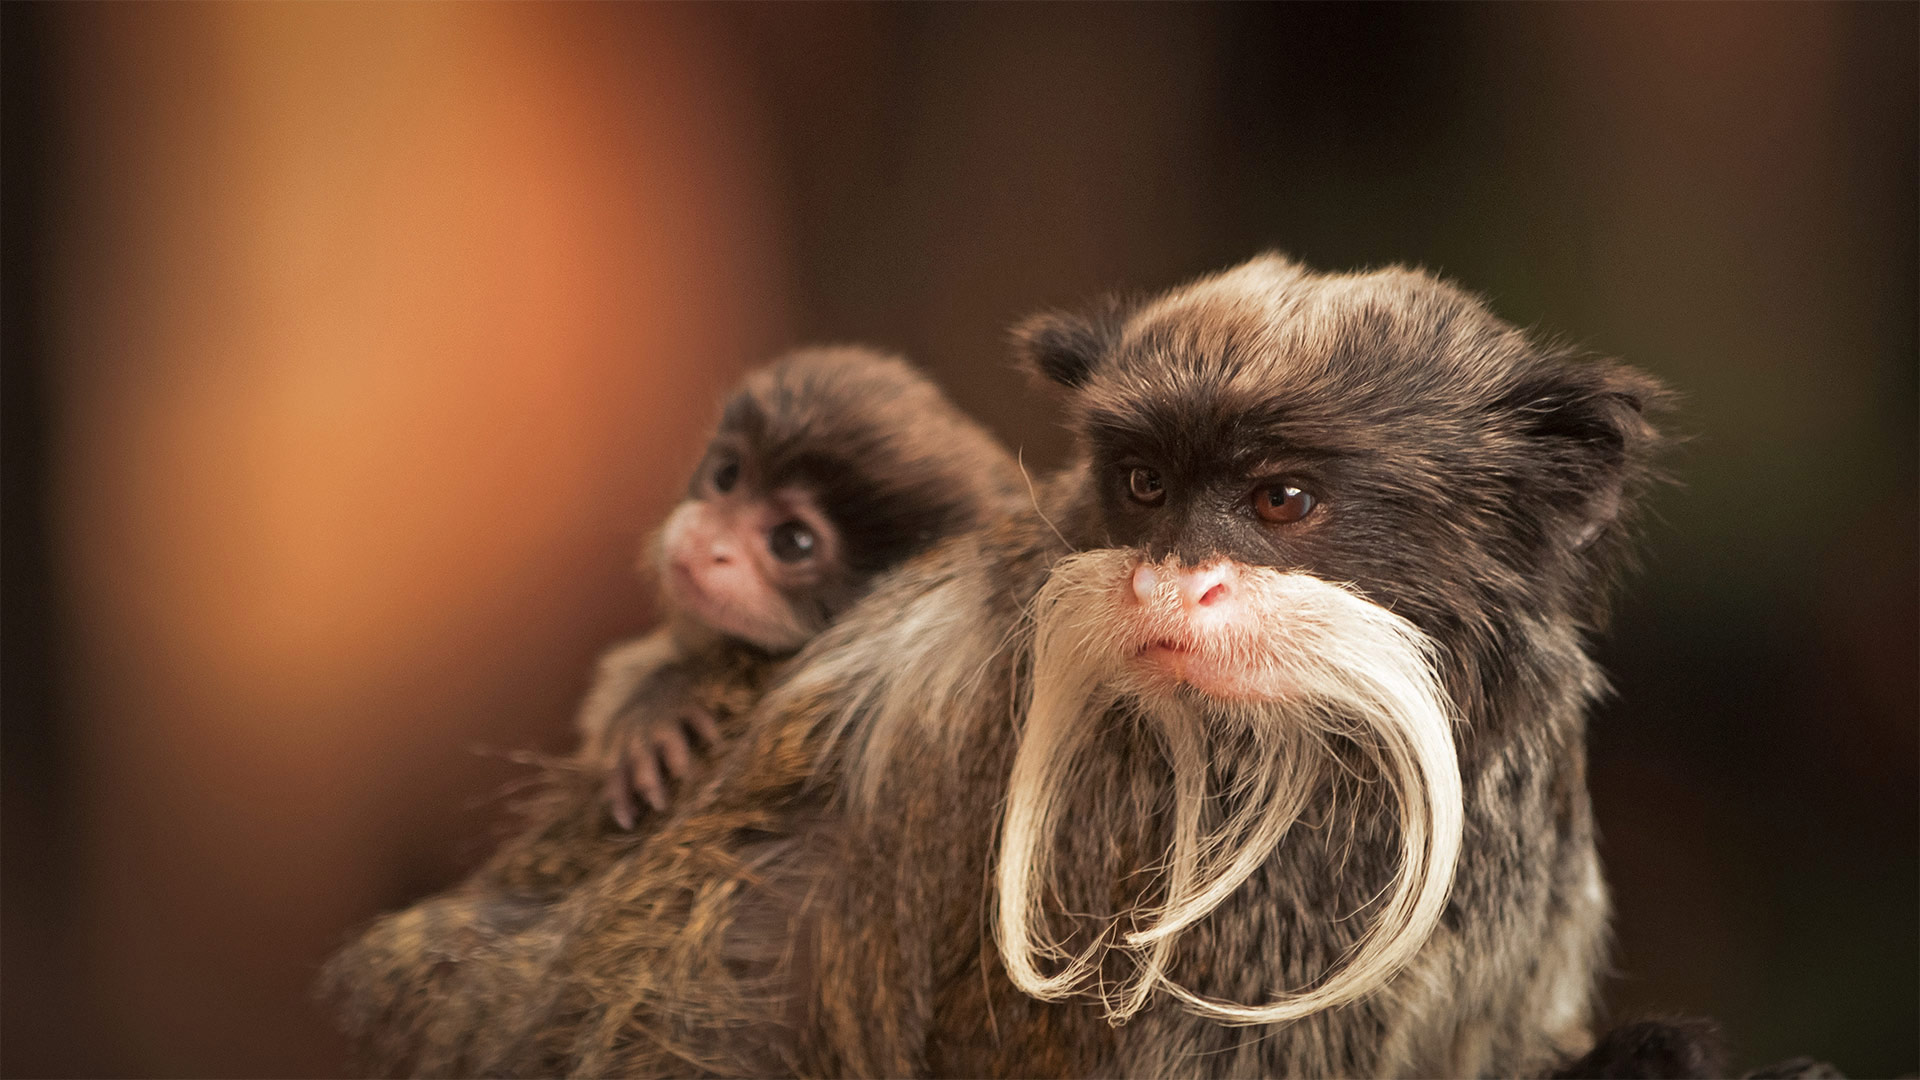 A bearded emperor tamarin monkey carrying a baby - Chris White/iStock/Getty Images Plus)